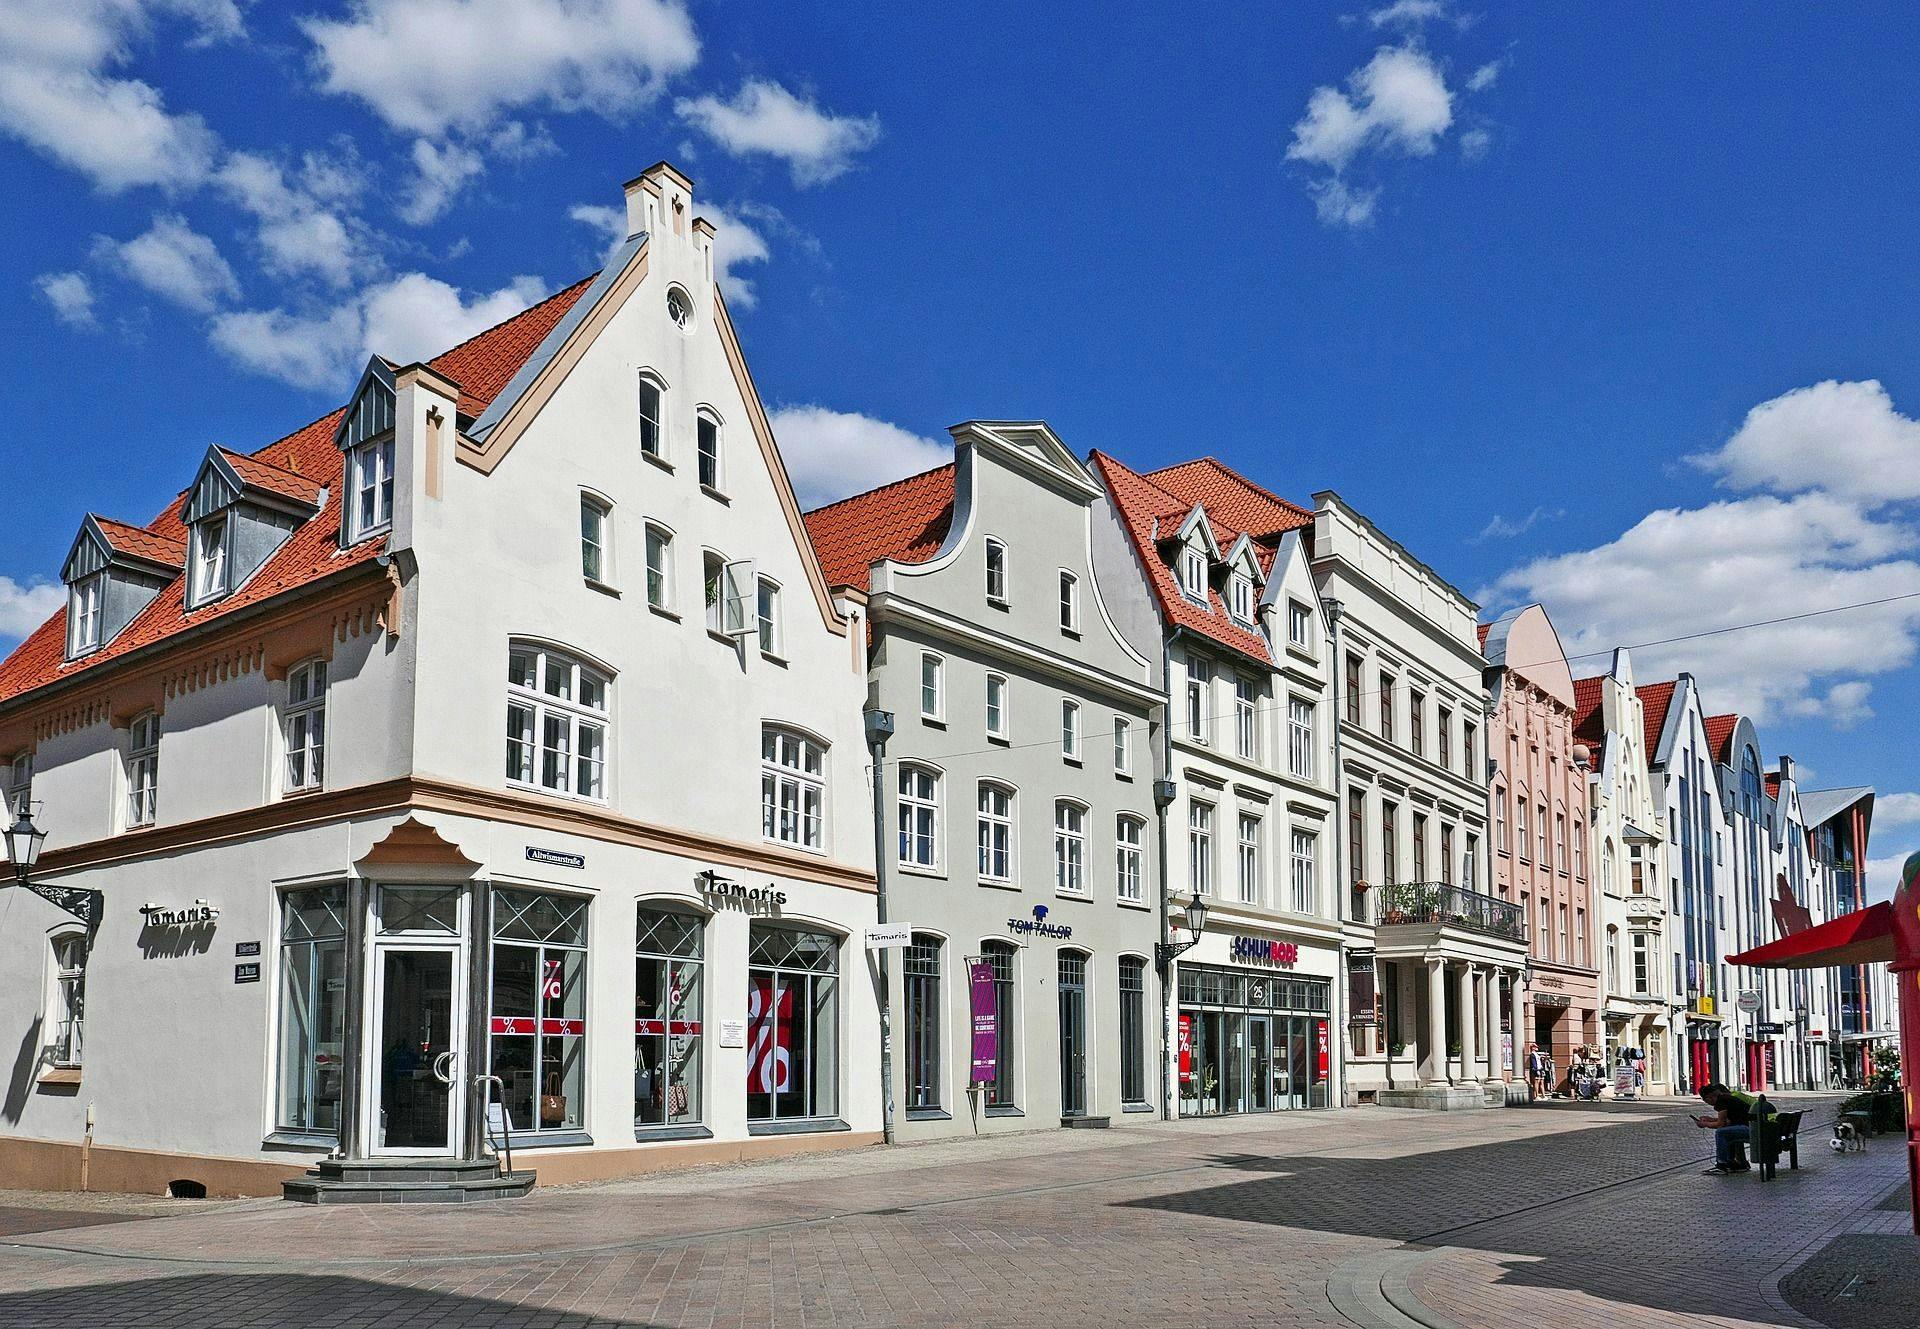 Wismar private and guided walking tour